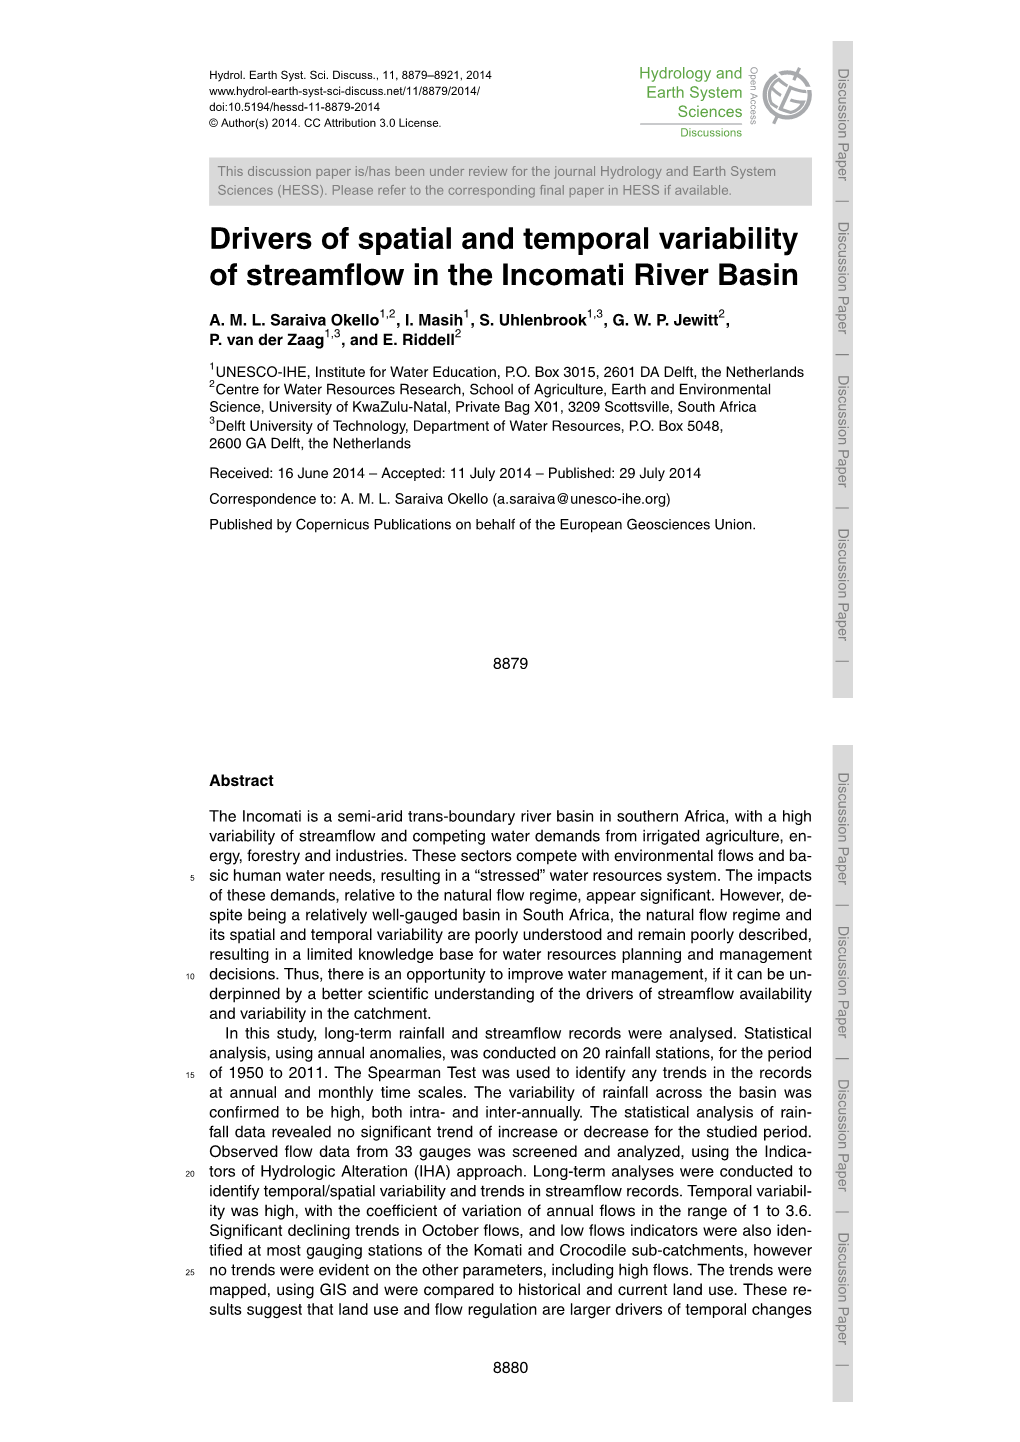 Drivers of Spatial and Temporal Variability of Streamflow in The